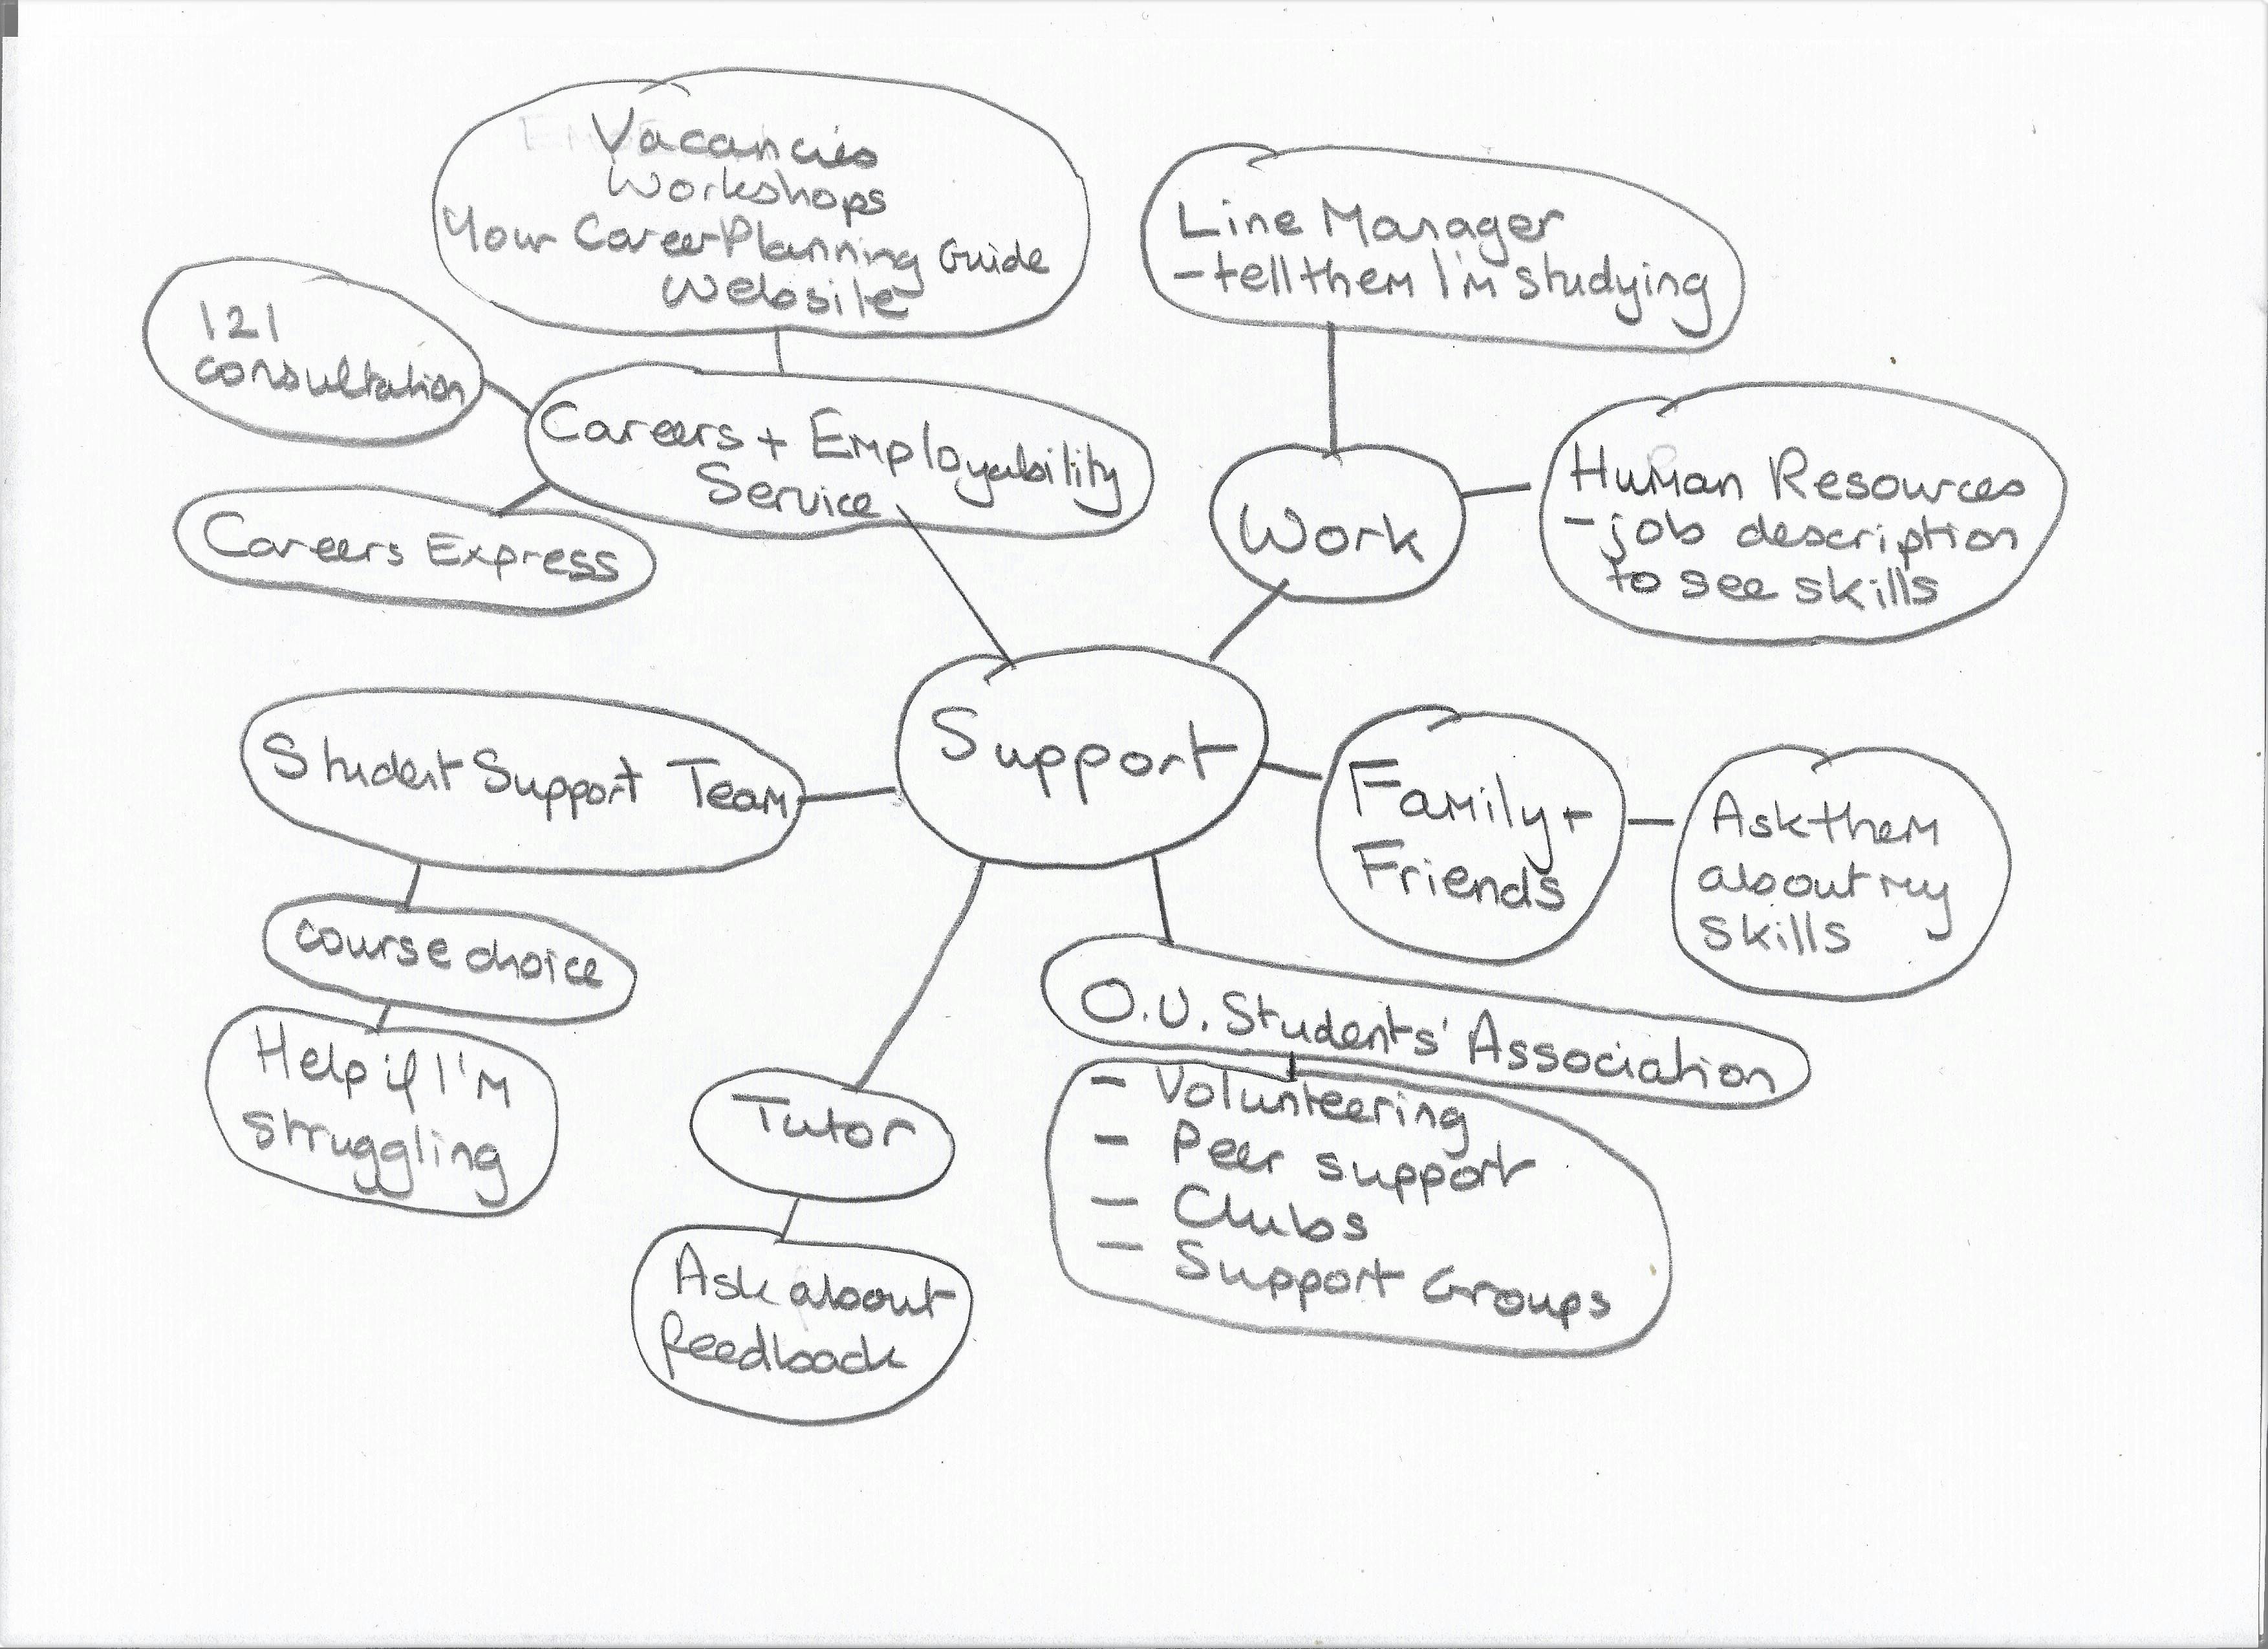 An example of a student’s mind map of sources of support for career help.